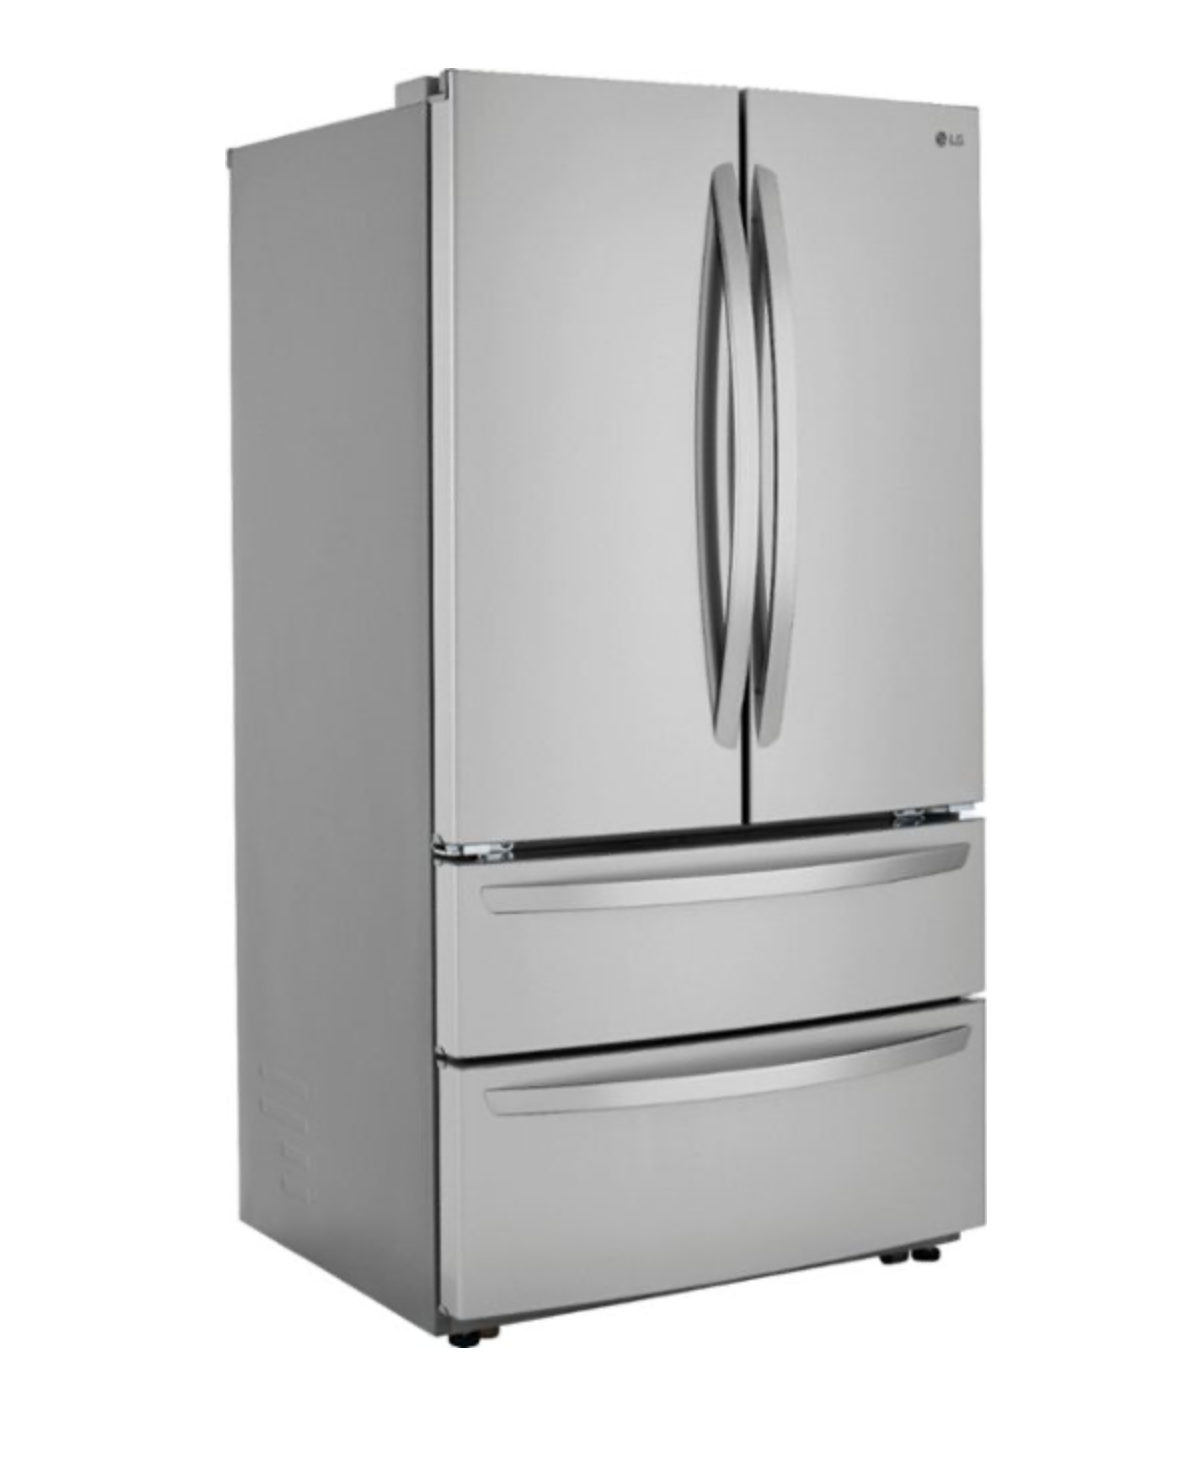 LG - 26.9 Cu. Ft. 4-Door French Door Refrigerator with Internal Water Dispenser - Stainless Steel (very small dent top right corner) – (P)